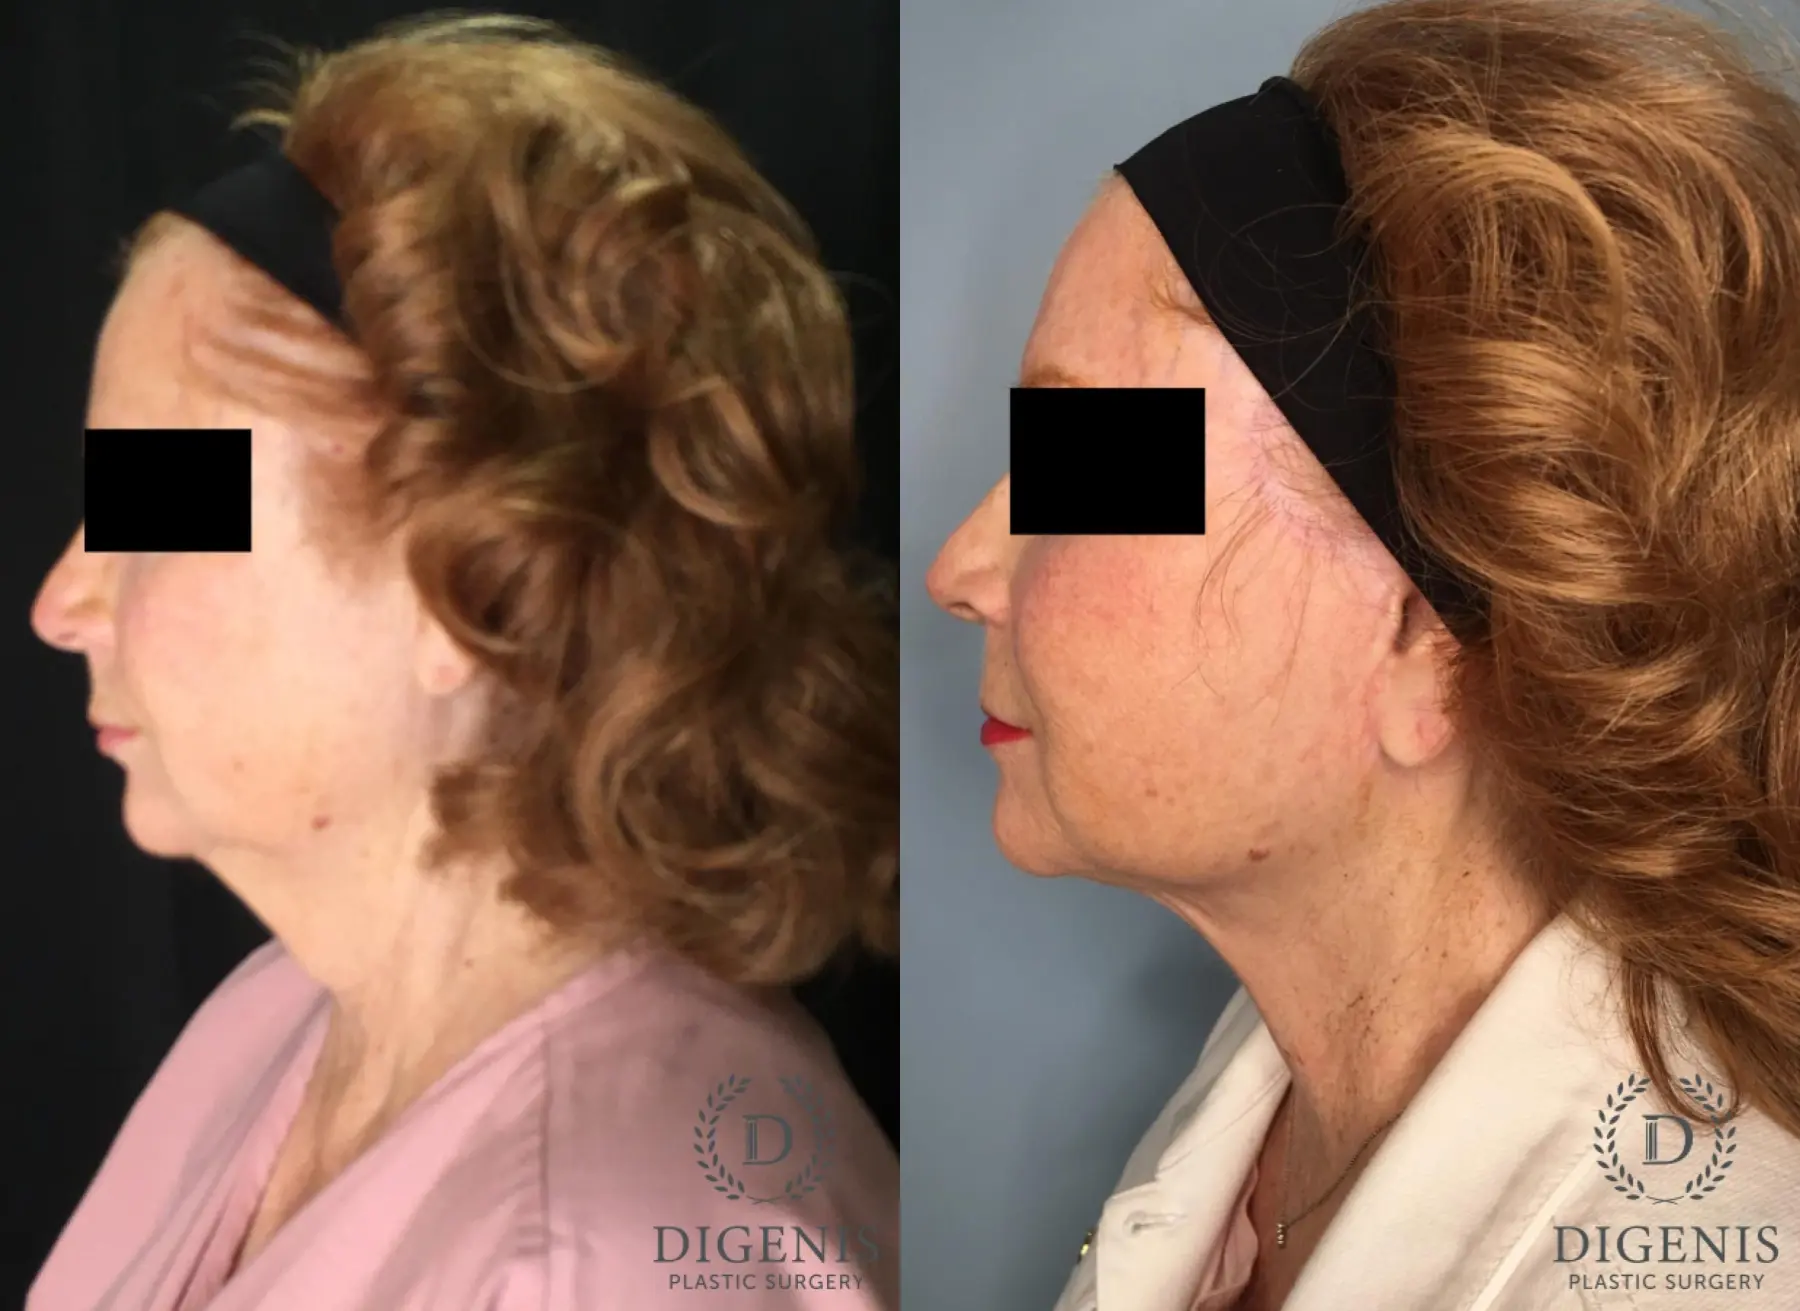 Facelift: Patient 2 - Before and After 5